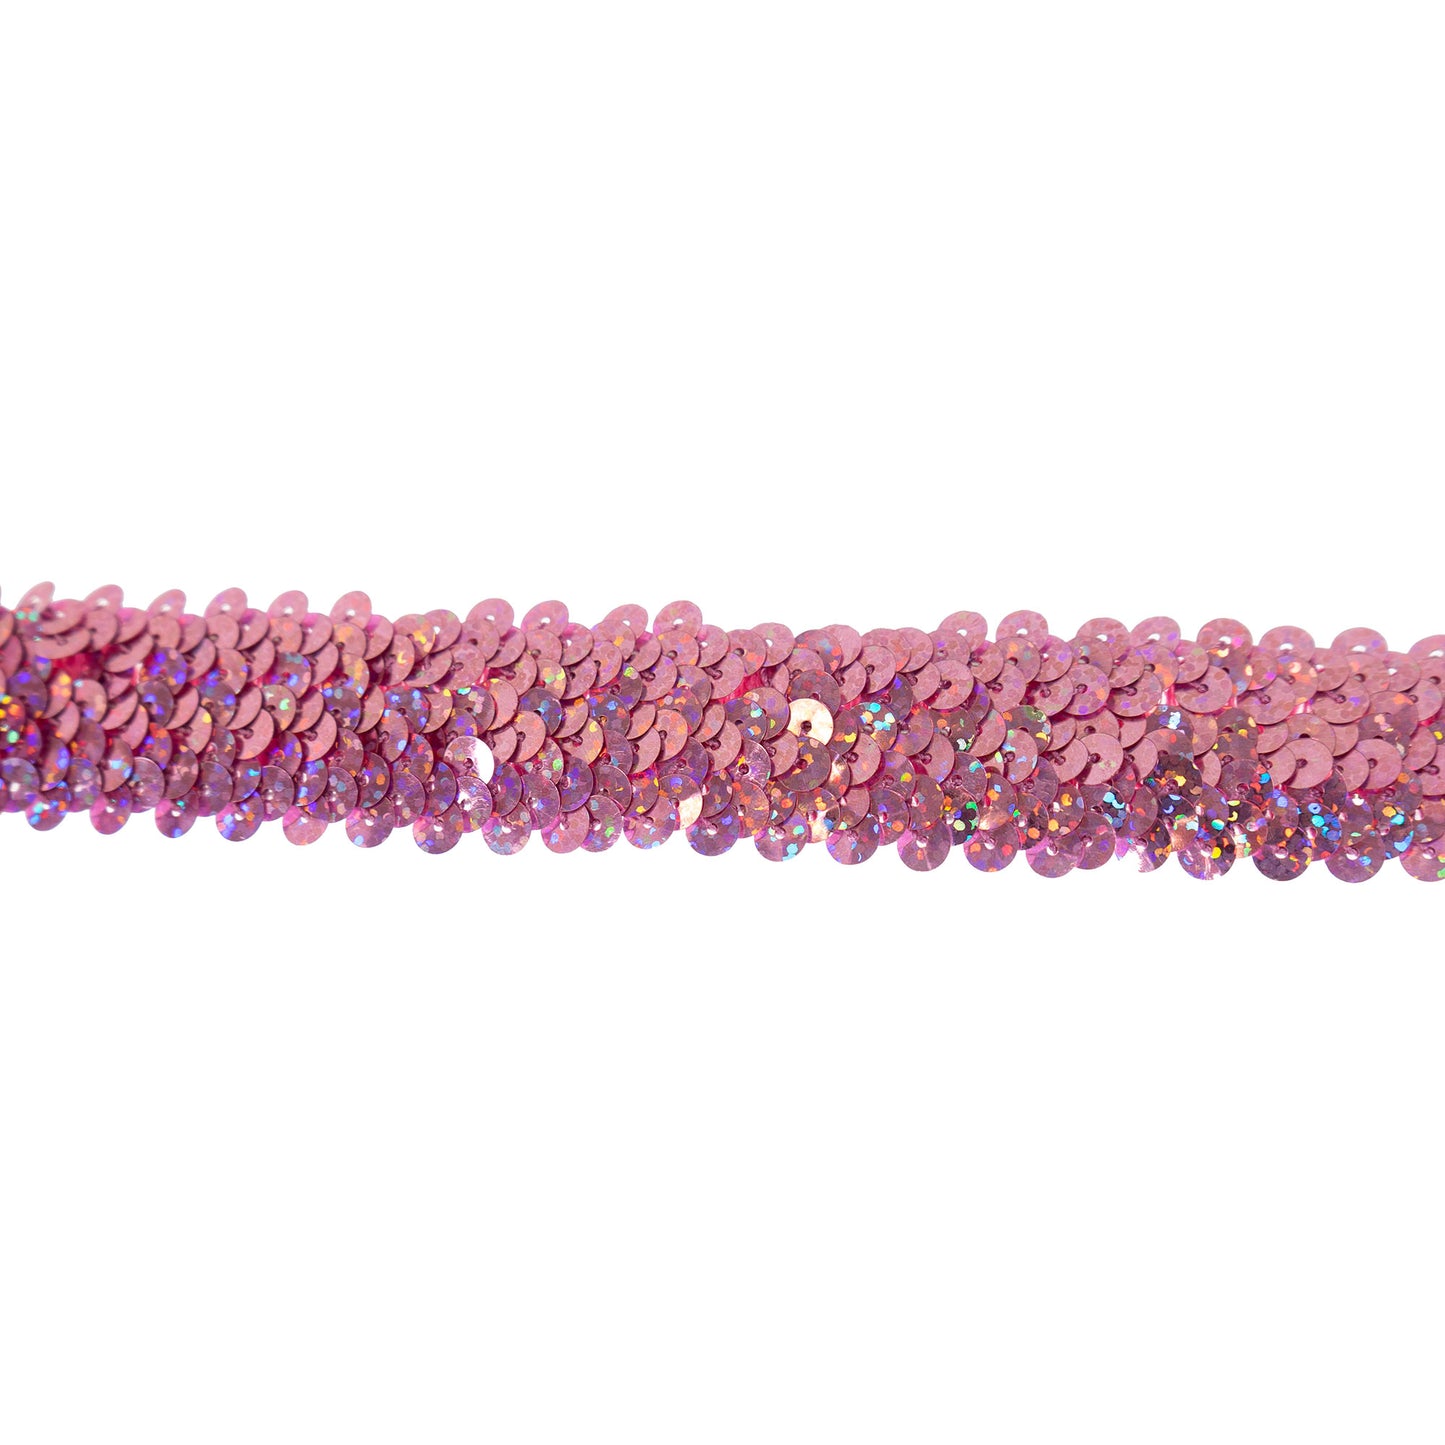 3 Row Starlight Stretch Sequin Trim 1 1/4" (Sold by the Yard)